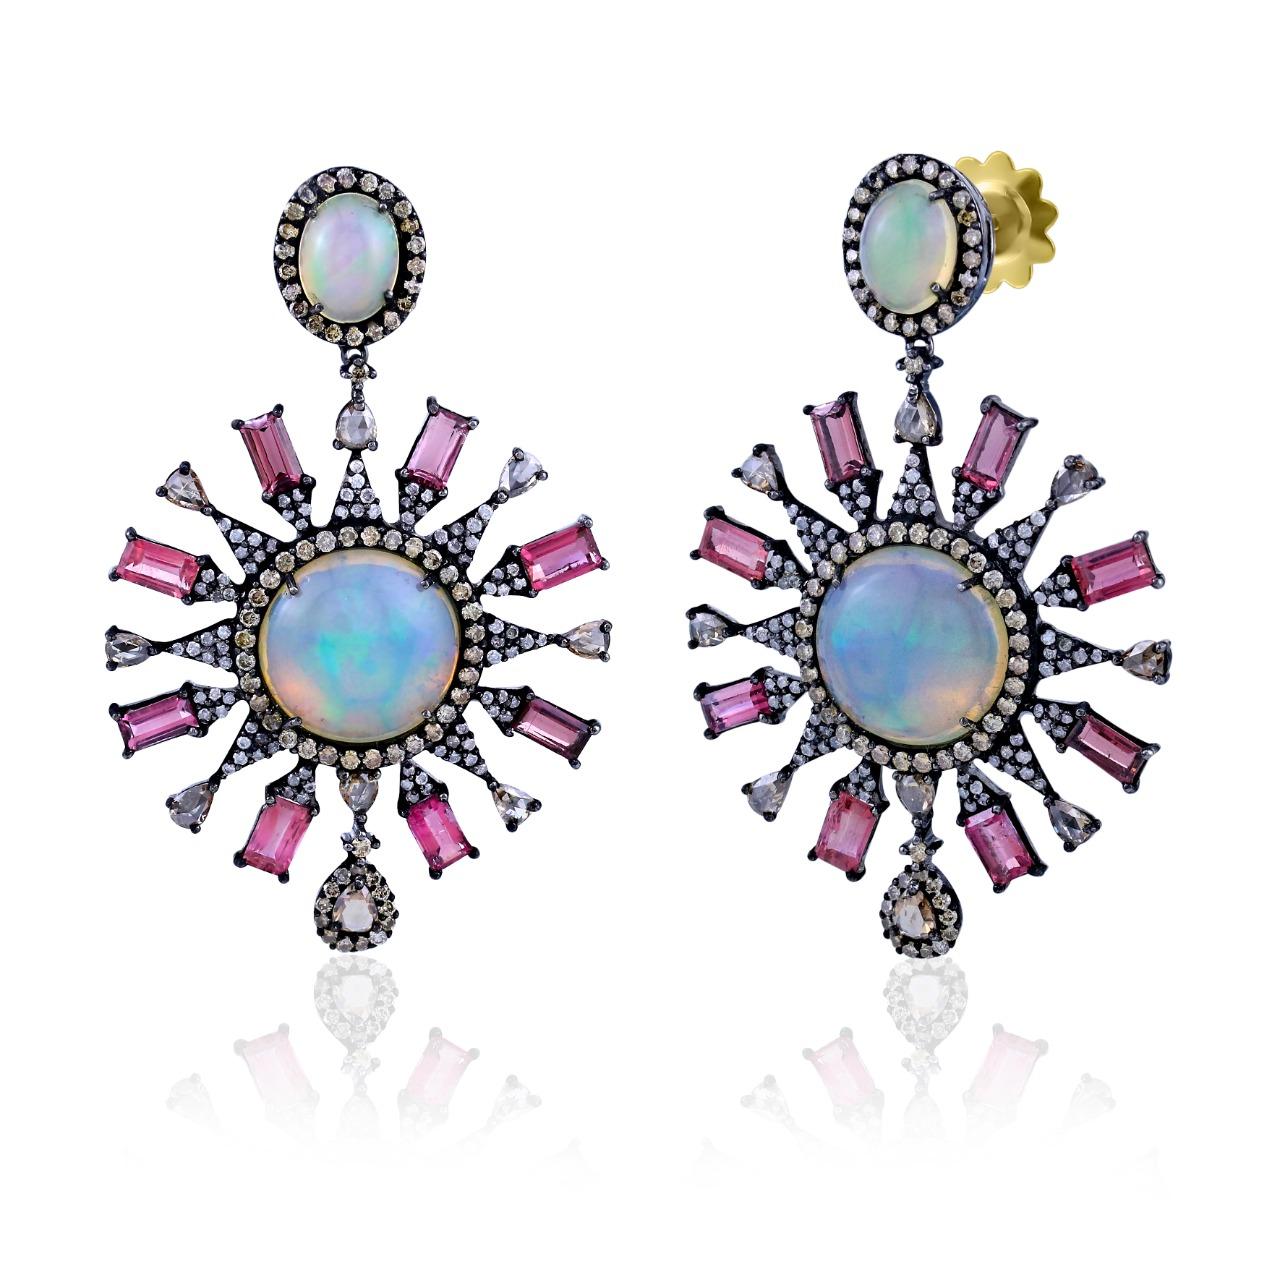 This Gemistry, majestically decorated dangle earrings are created on an 18K/925 Black Rhodium Sterling Silver body. The Victorian era jewelries are encrusted with mix diamonds, weighing 3.8 Cts. Pink mix cut Tourmaline stone, mix and cushion cab